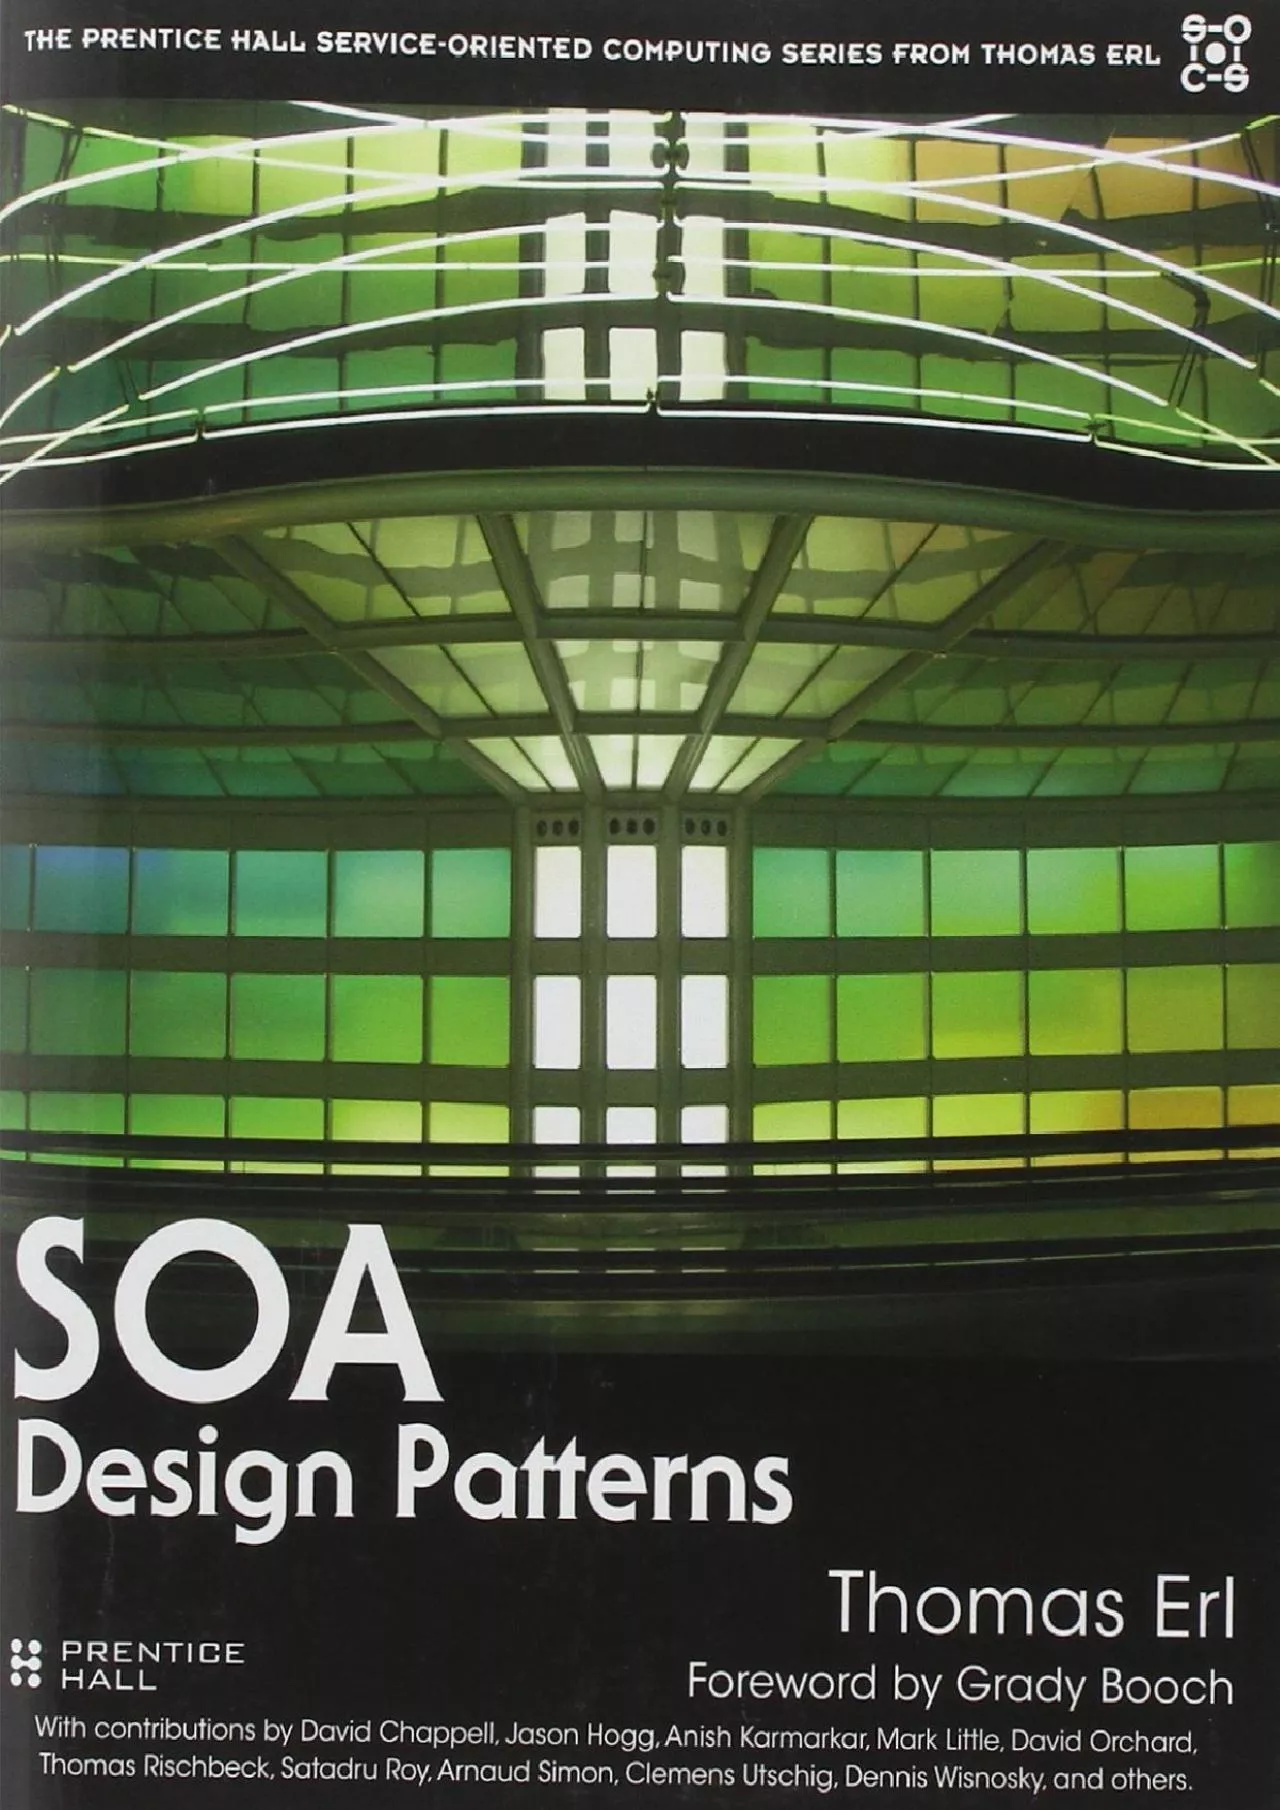 (BOOS)-SOA Design Patterns (The Prentice Hall Service-Oriented Computing Series from Thomas